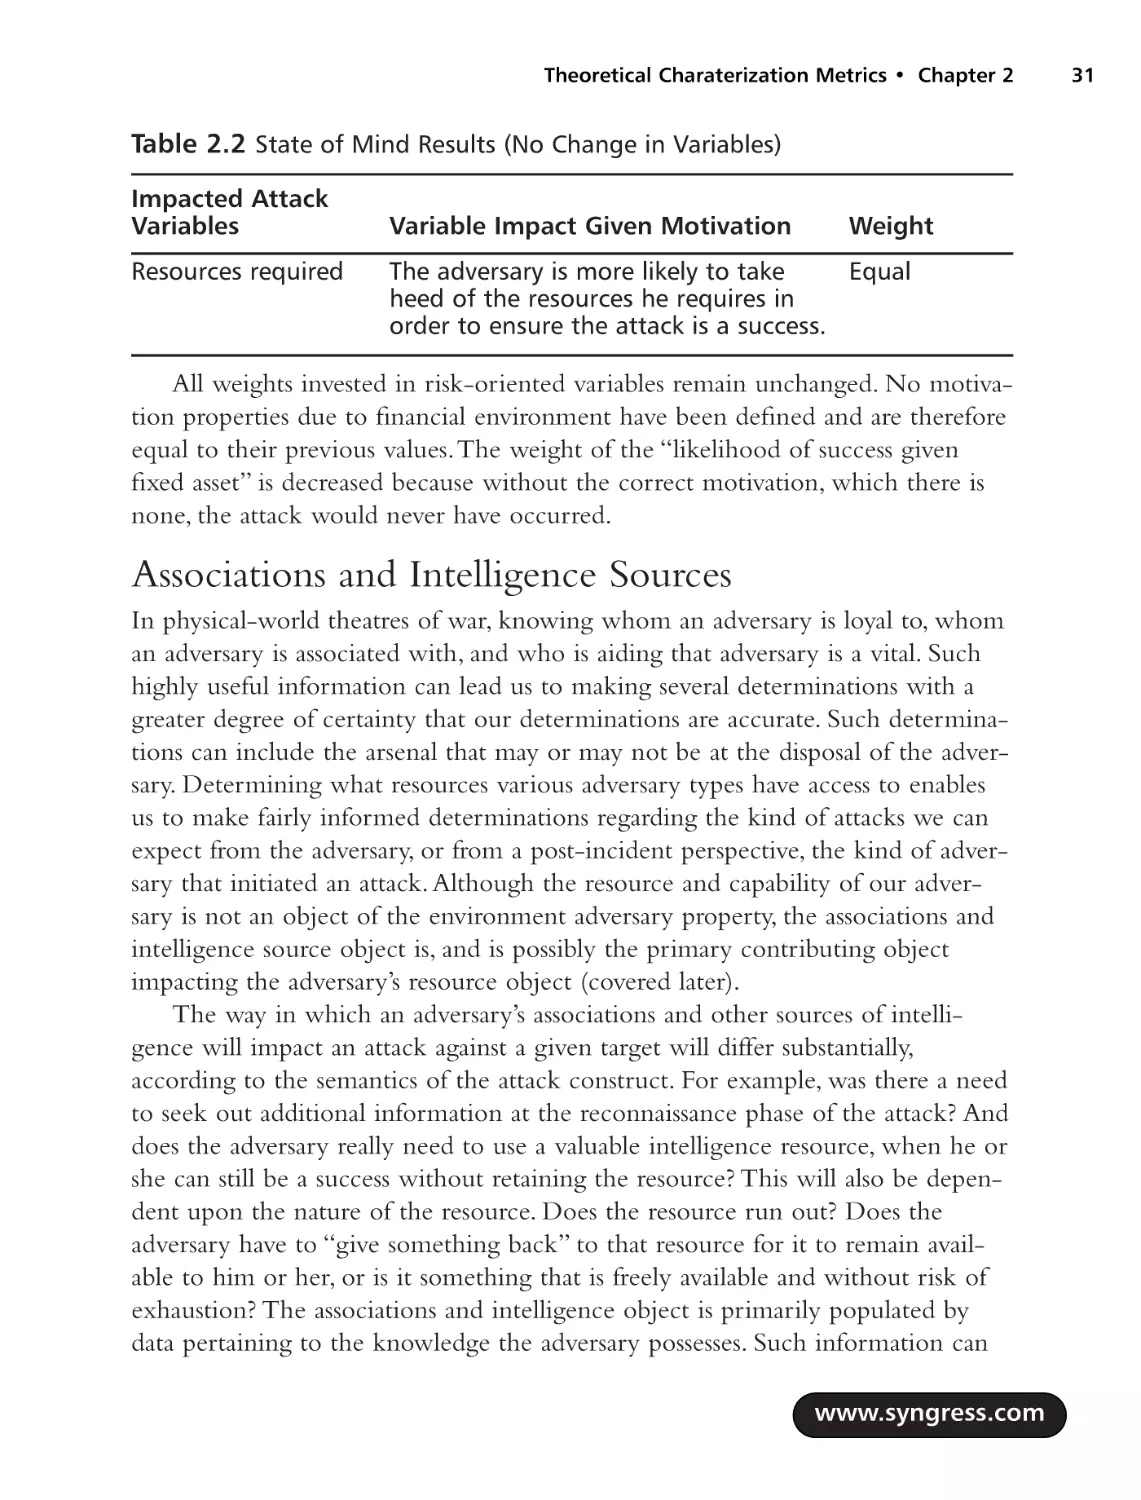 Associations and Intelligence Sources